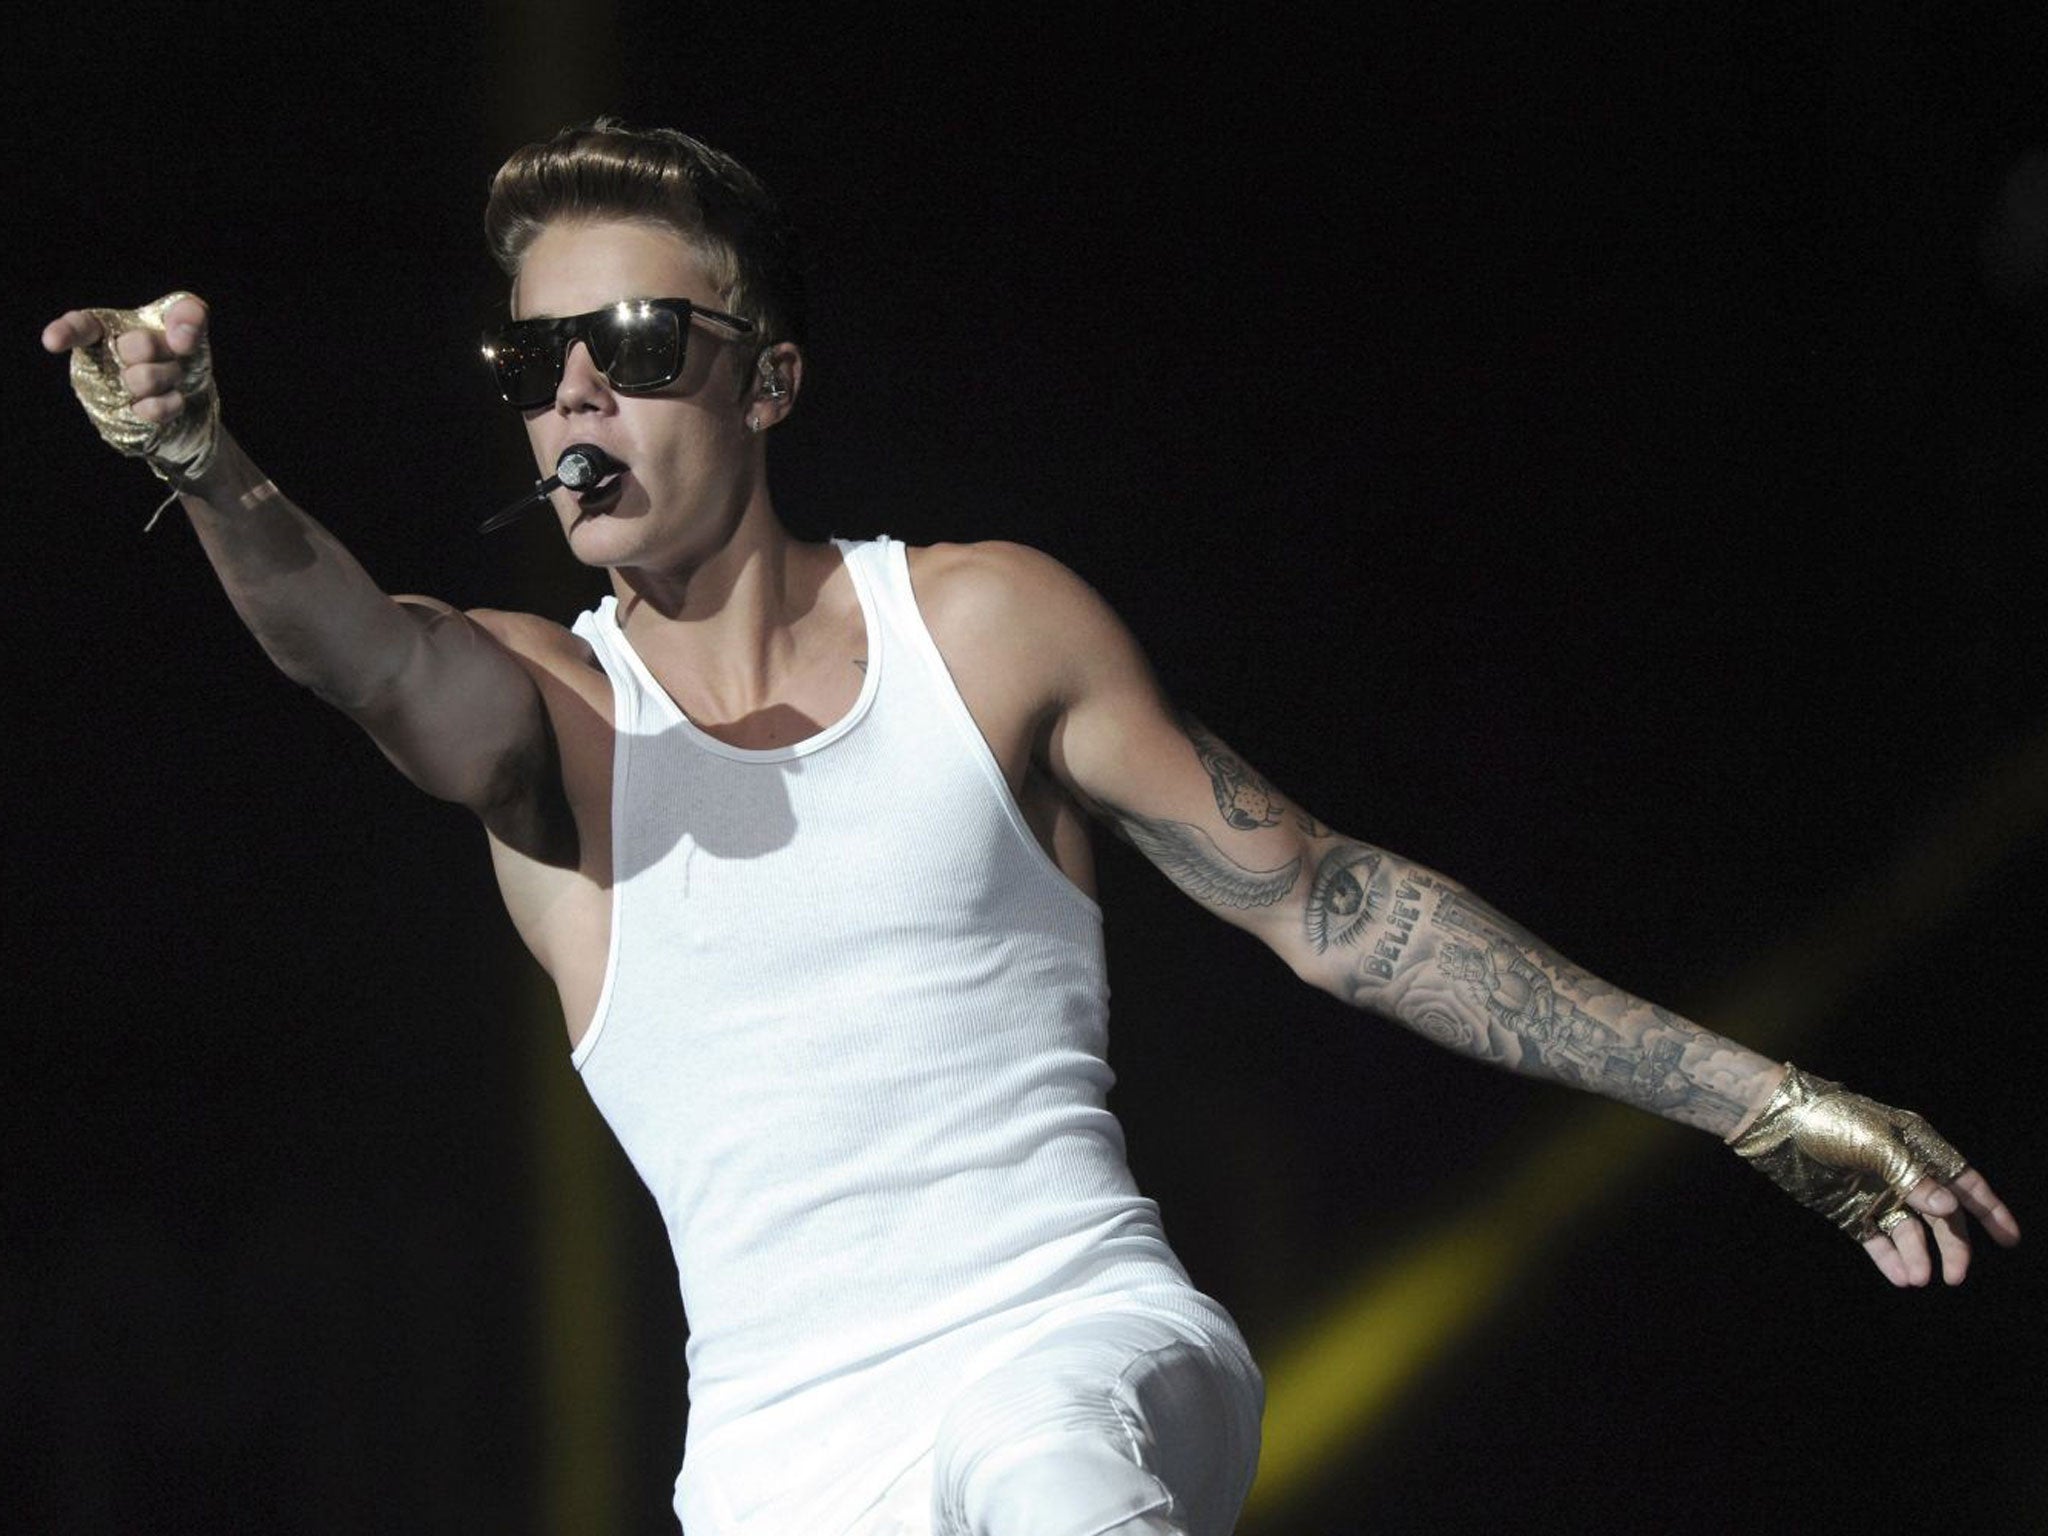 A petition to deport Justin Bieber has reached 100,000 signatures